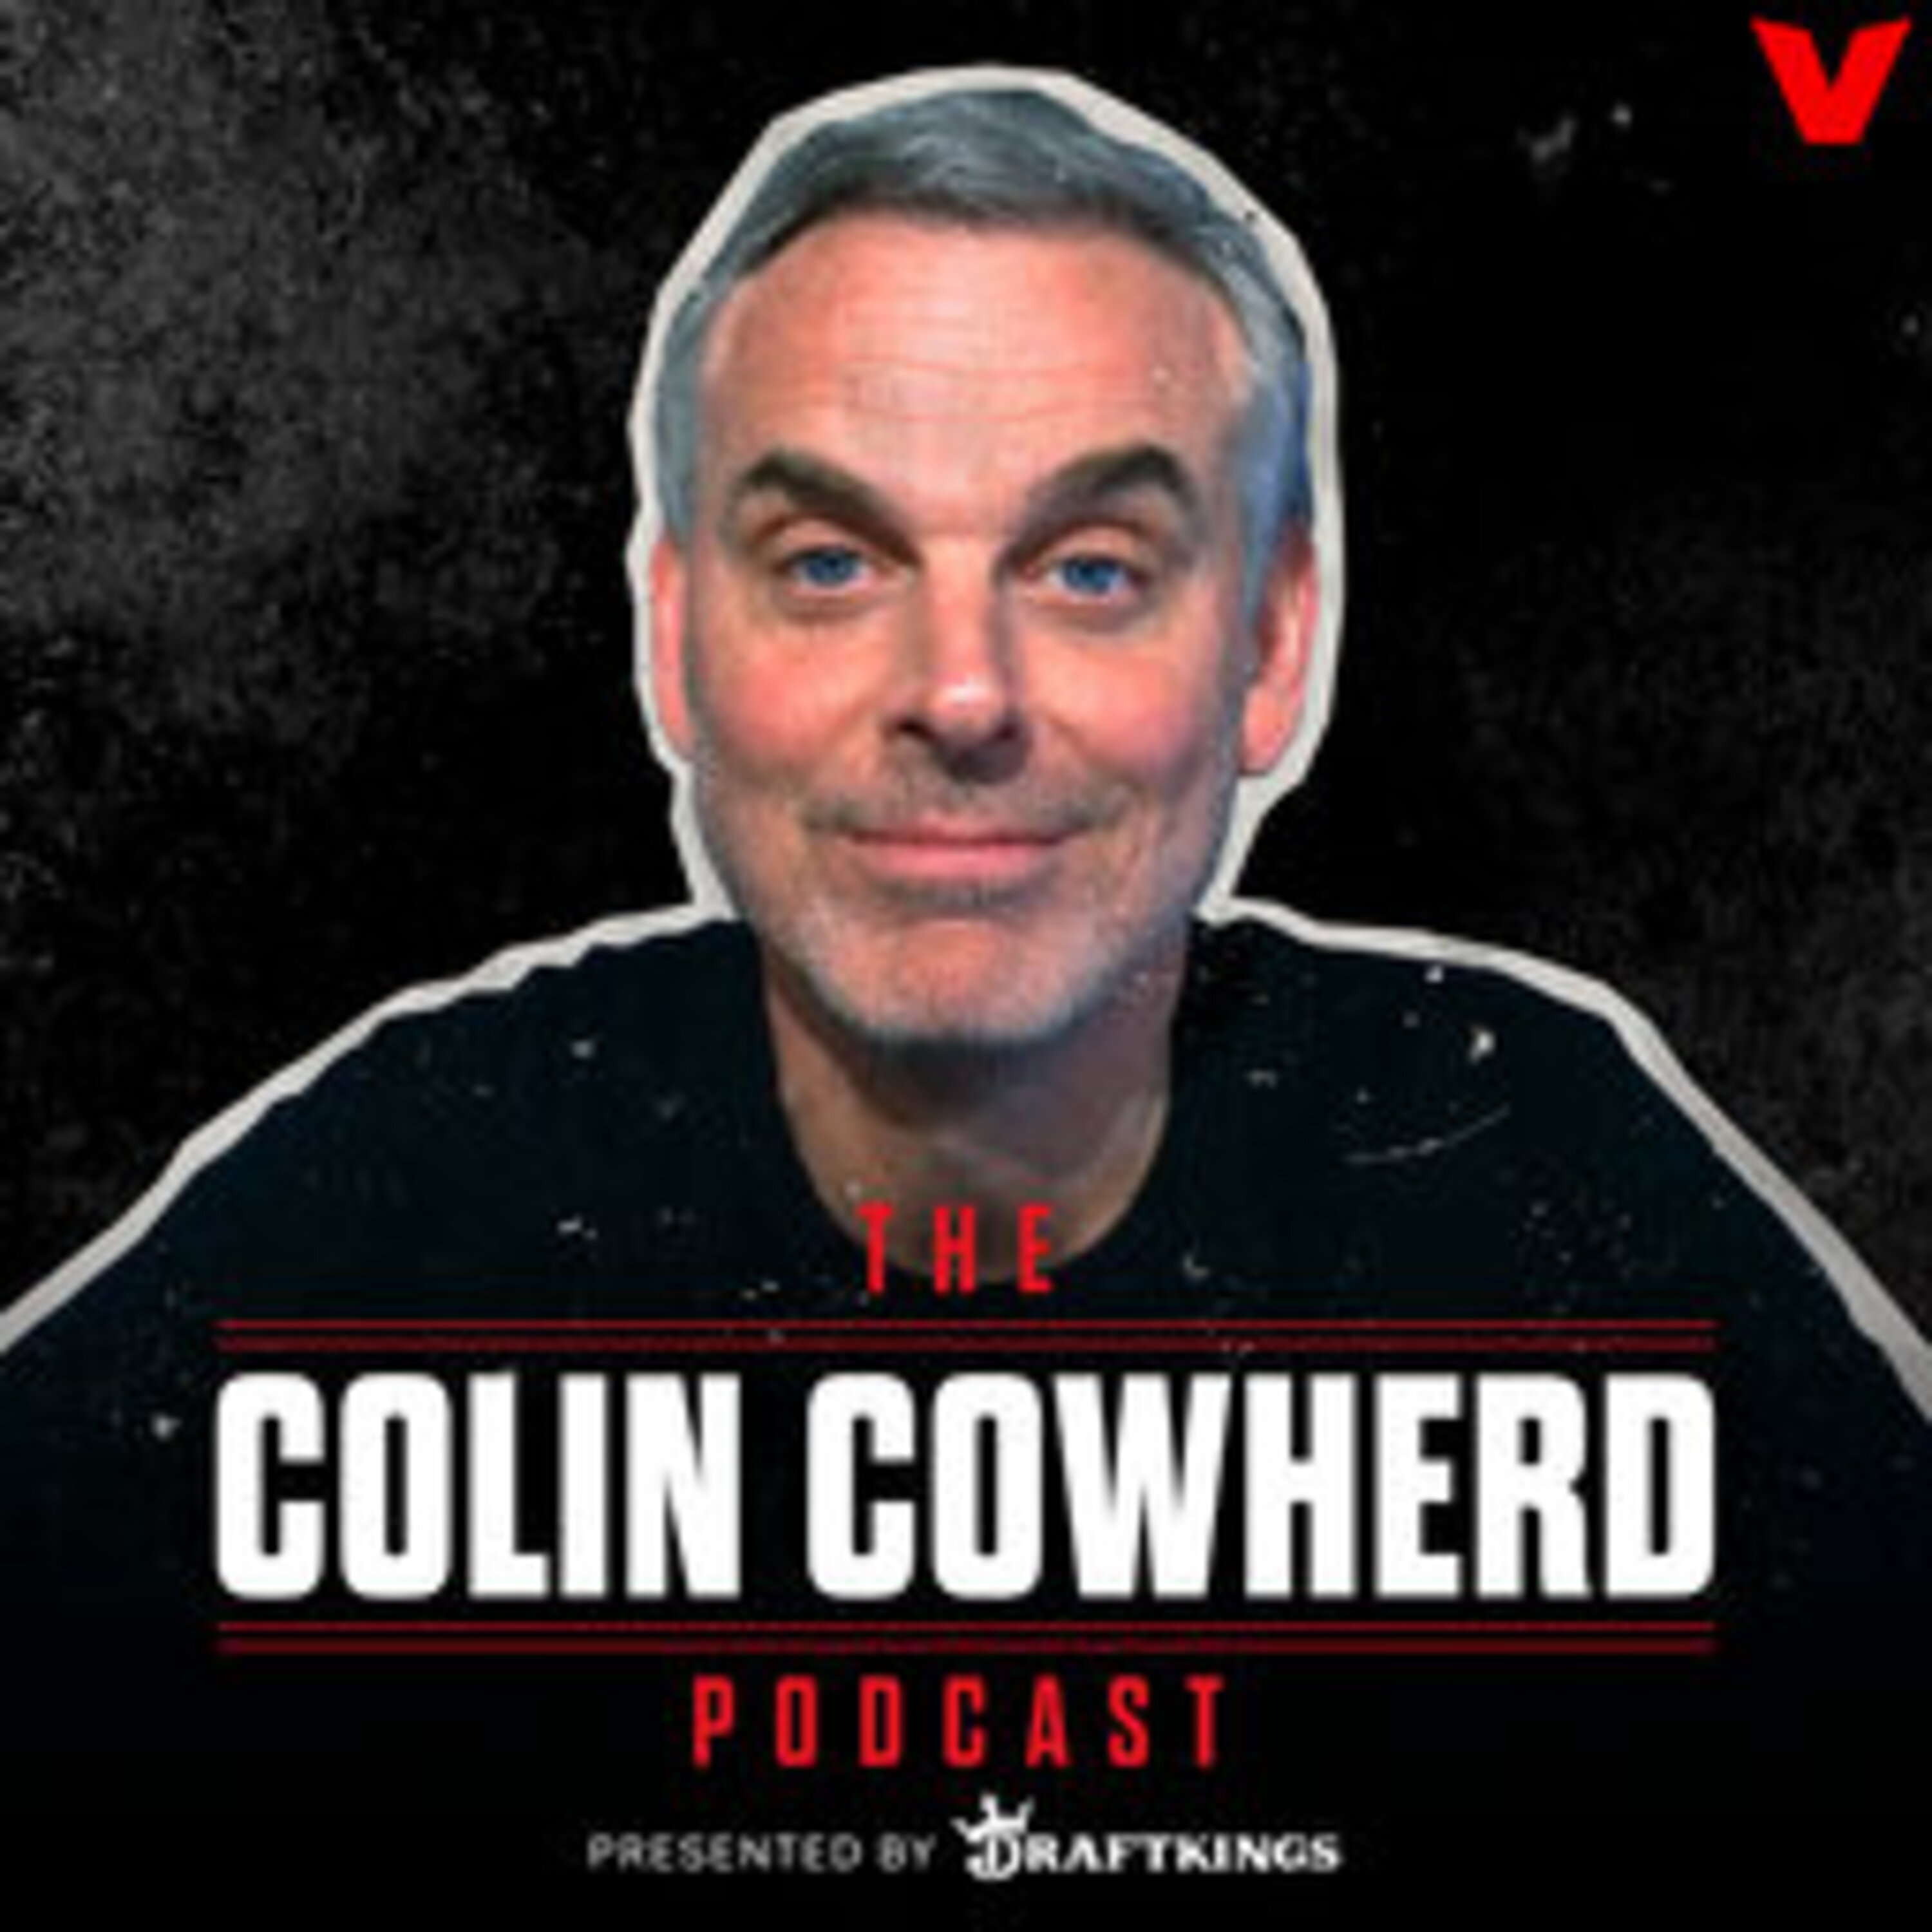 Colin Cowherd Podcast - NFL Draft Primer: Concerns With J.J. McCarthy? Drake Maye Needs The Right Coaching, Top 5 Mock Draft